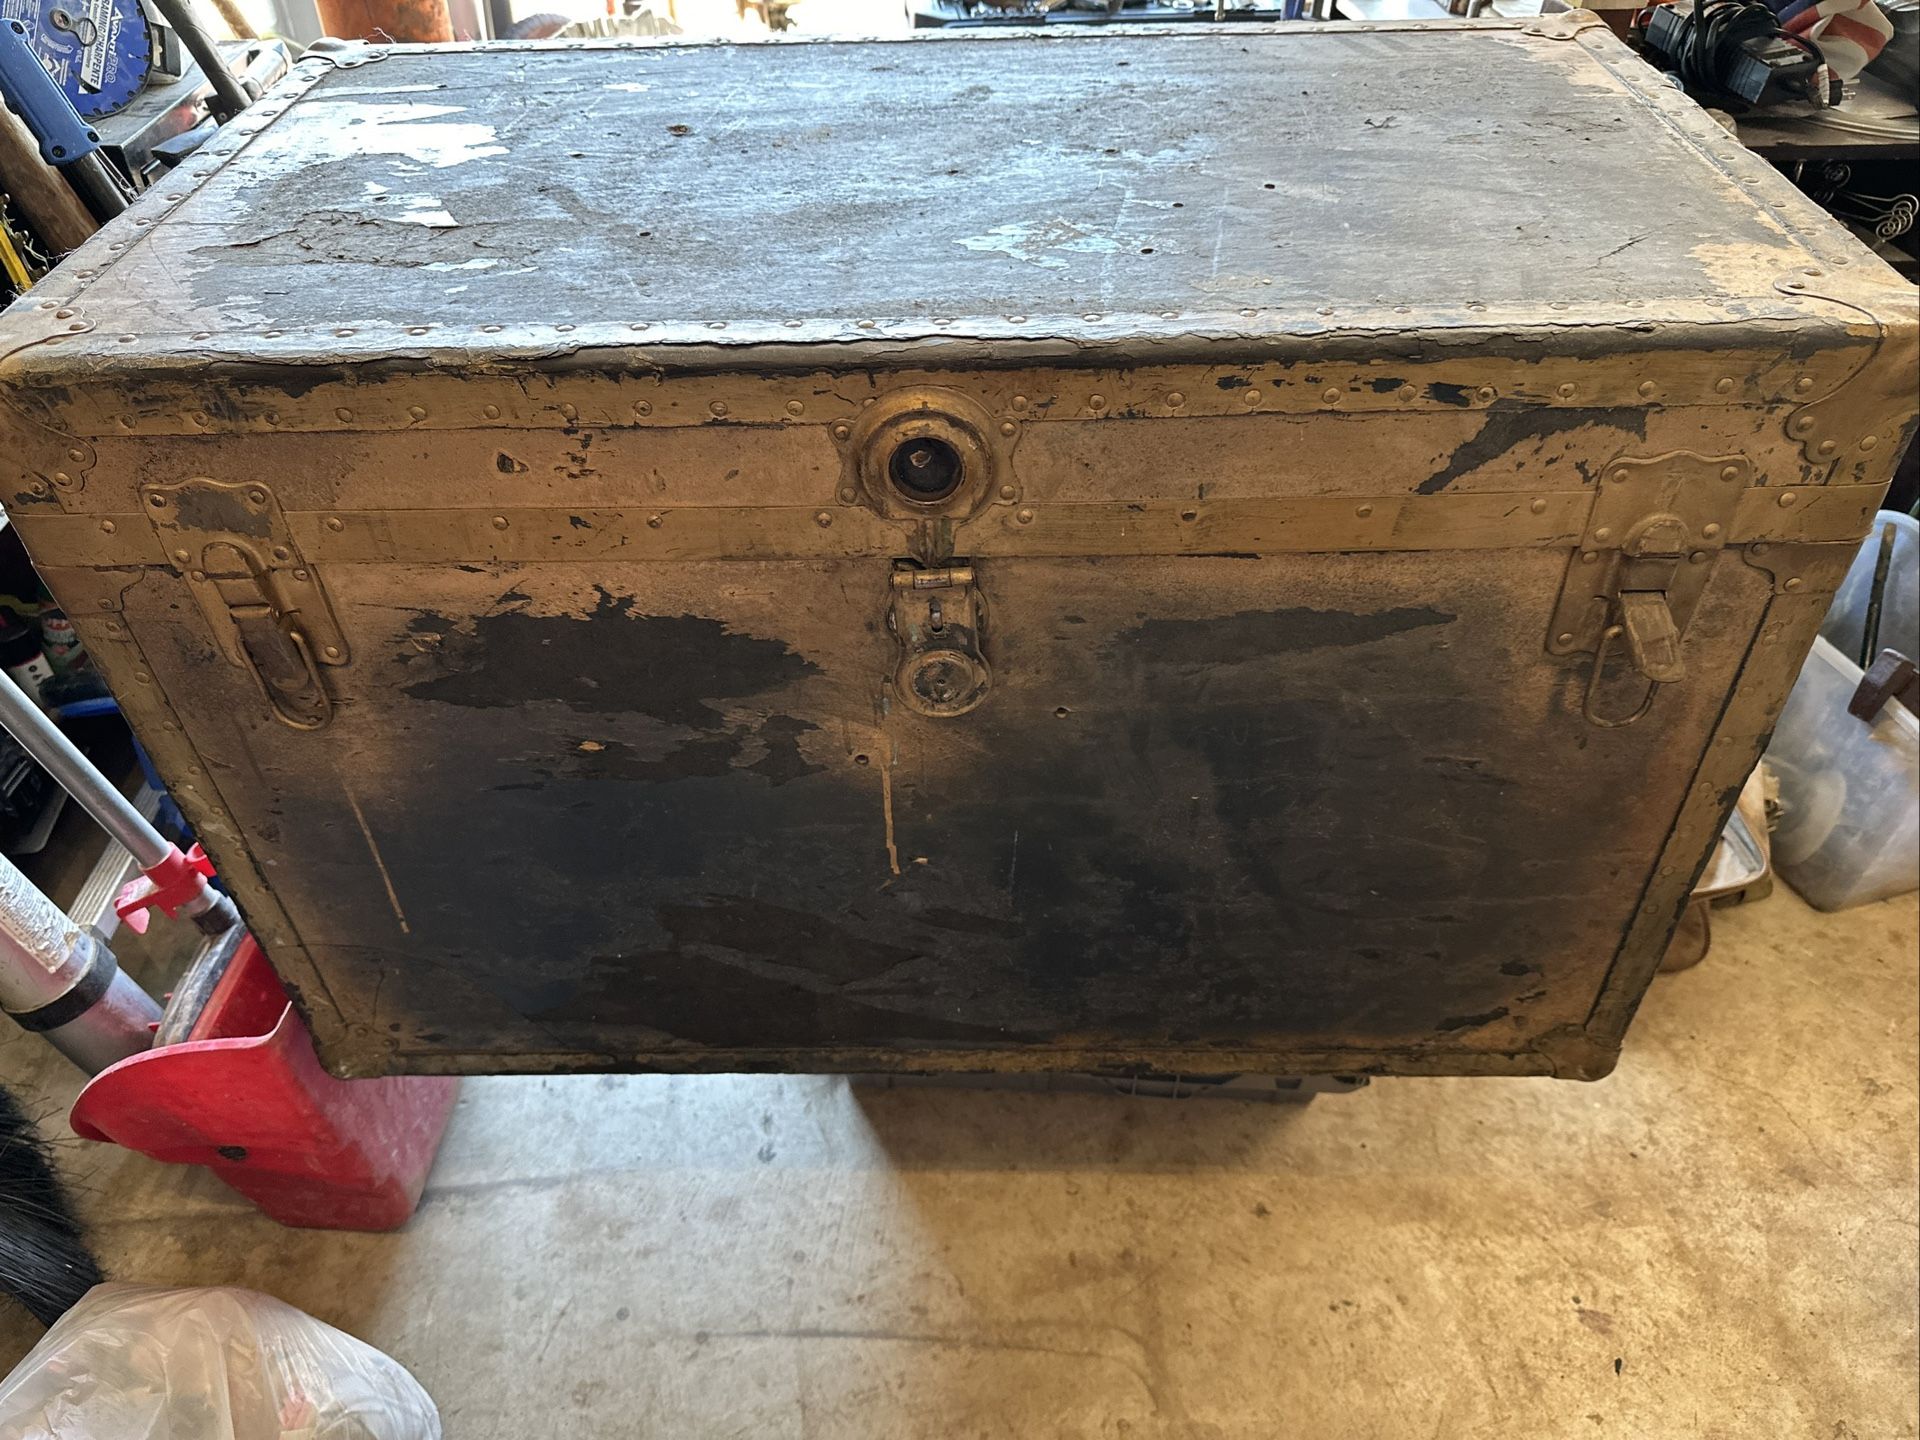 Steamer Trunk, 38”L x 23”H x 20.5” Deep, Needs Some TLC On The Appearance But Solid Structure